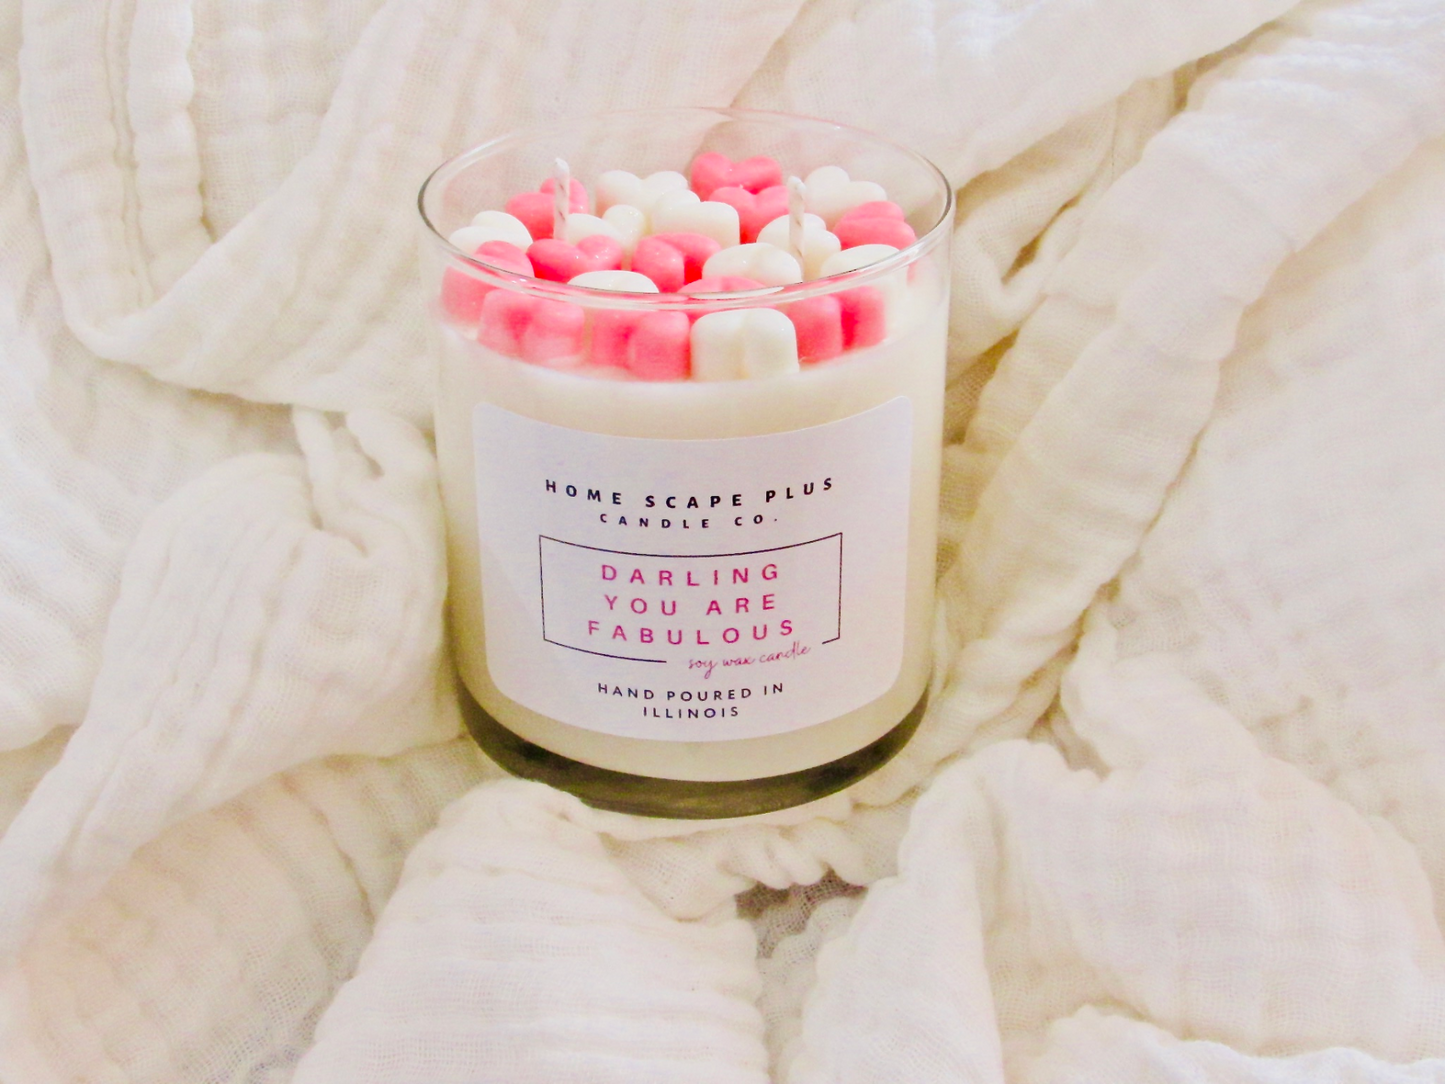 Darling You Are Fabulous-Soy Wax Candle with Hearts